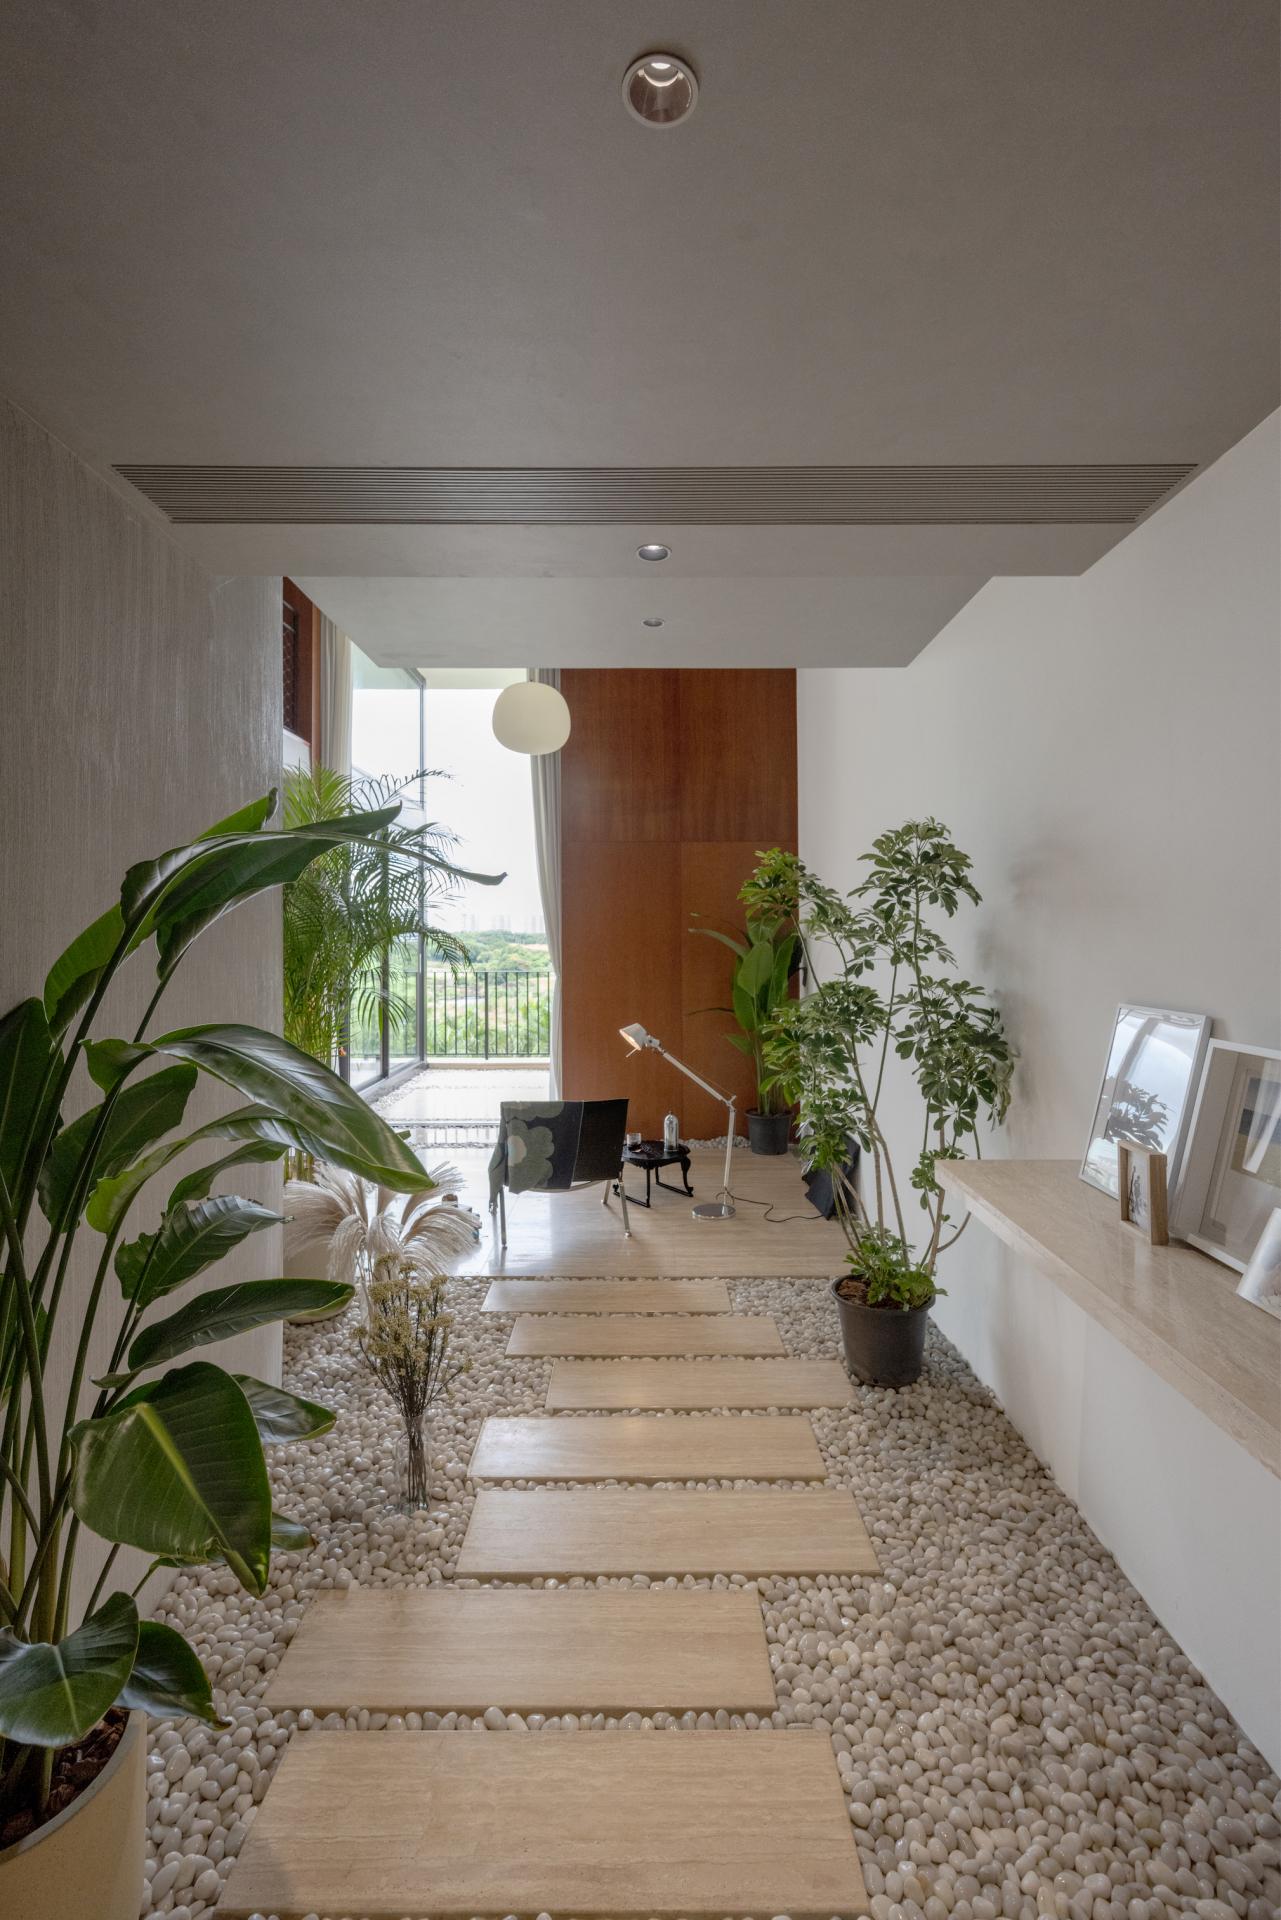 Escape to Tranquility: Tour a Breathtaking 1600 sq ft Garden Loft in Haikou, China